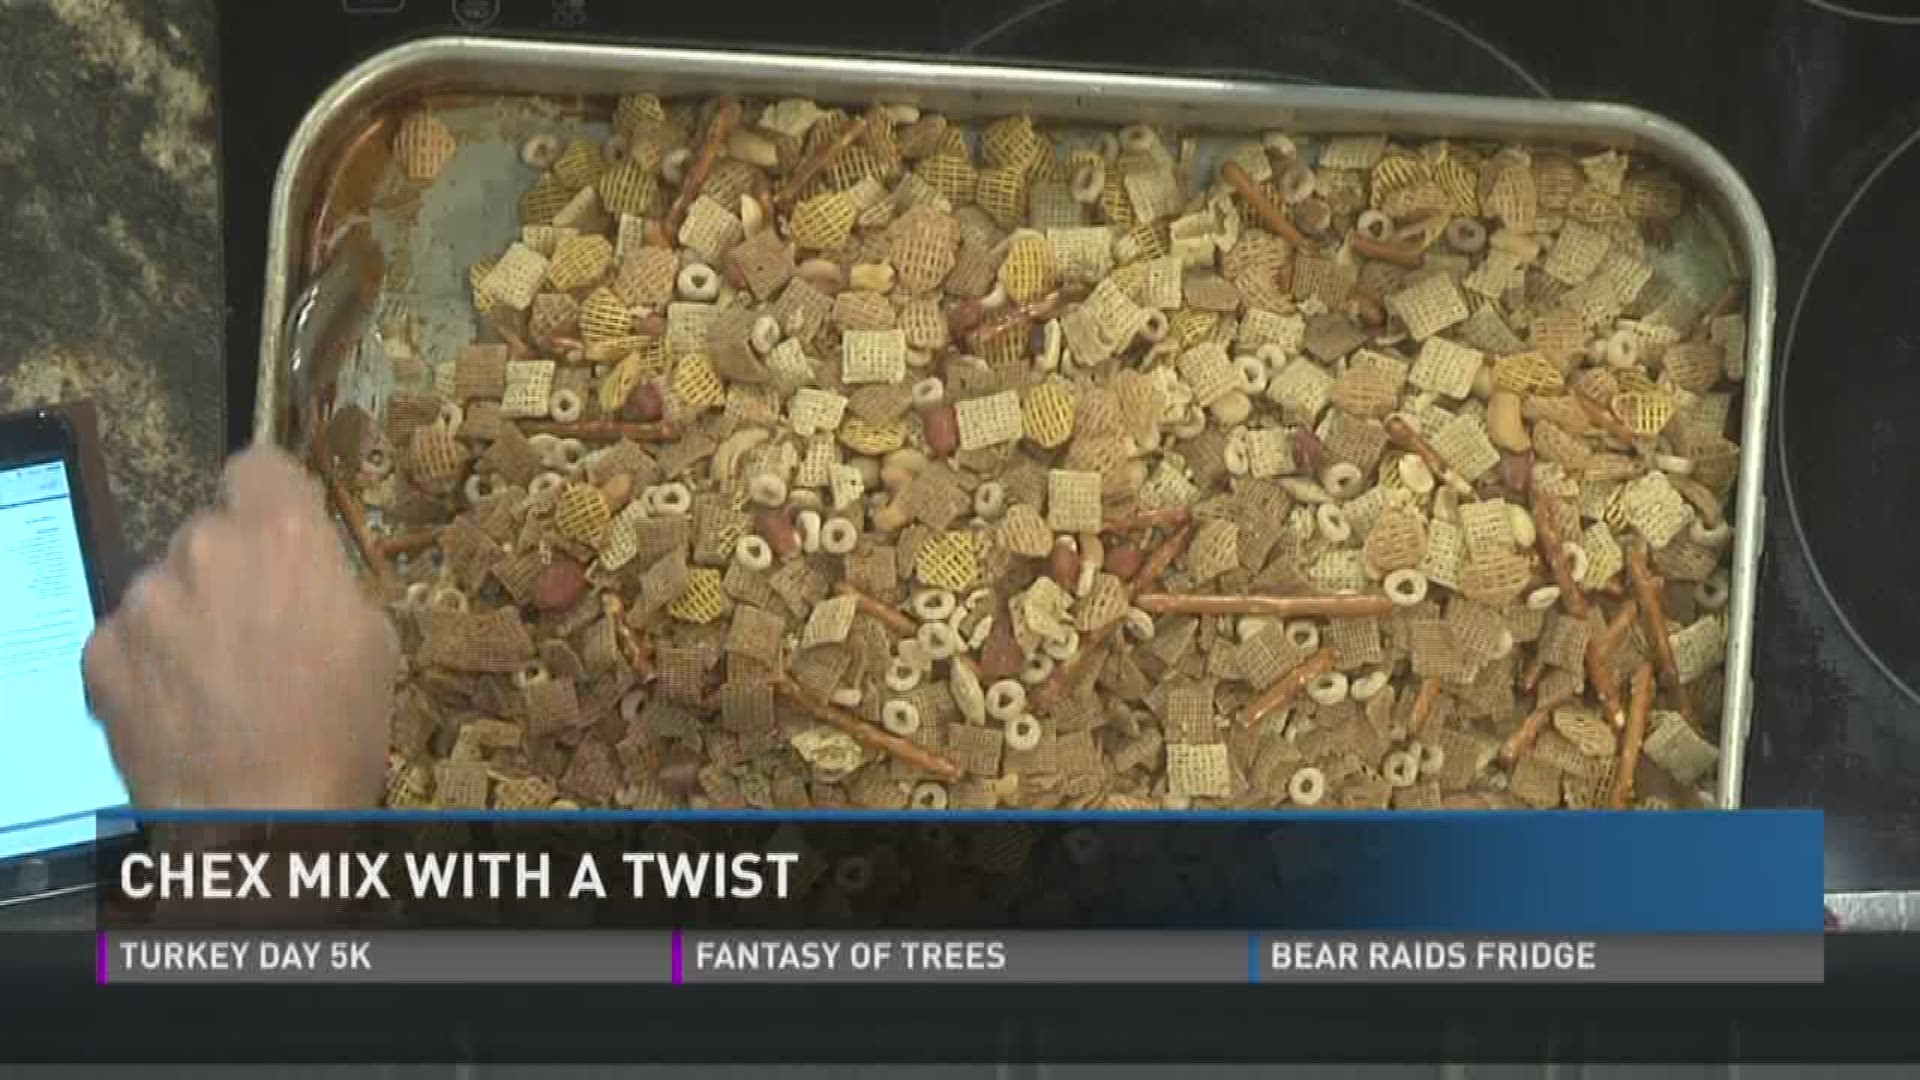 10News anchor John Becker shows how to make Chex Mix with a twist.